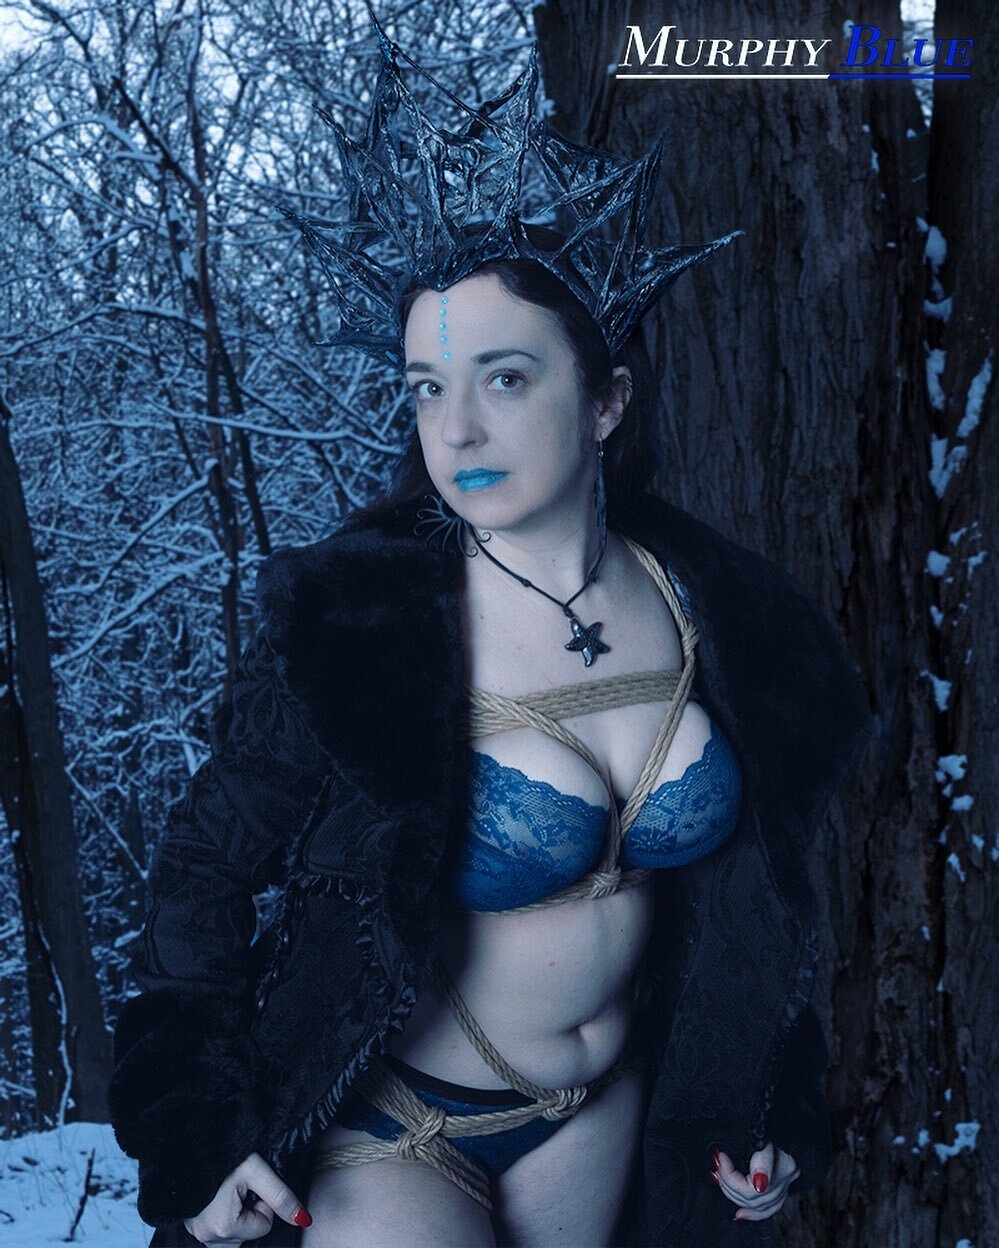 &ldquo;When the Matron of Winter passes your way, remember to honor her, lest she brings her chill to the unworthy.&rdquo;

Being chill with @maris.corde 

#sm #bluerope #shibari #ropetime #kinbaku #ropebondageart #snowbondage #ropeinthewoods #winter